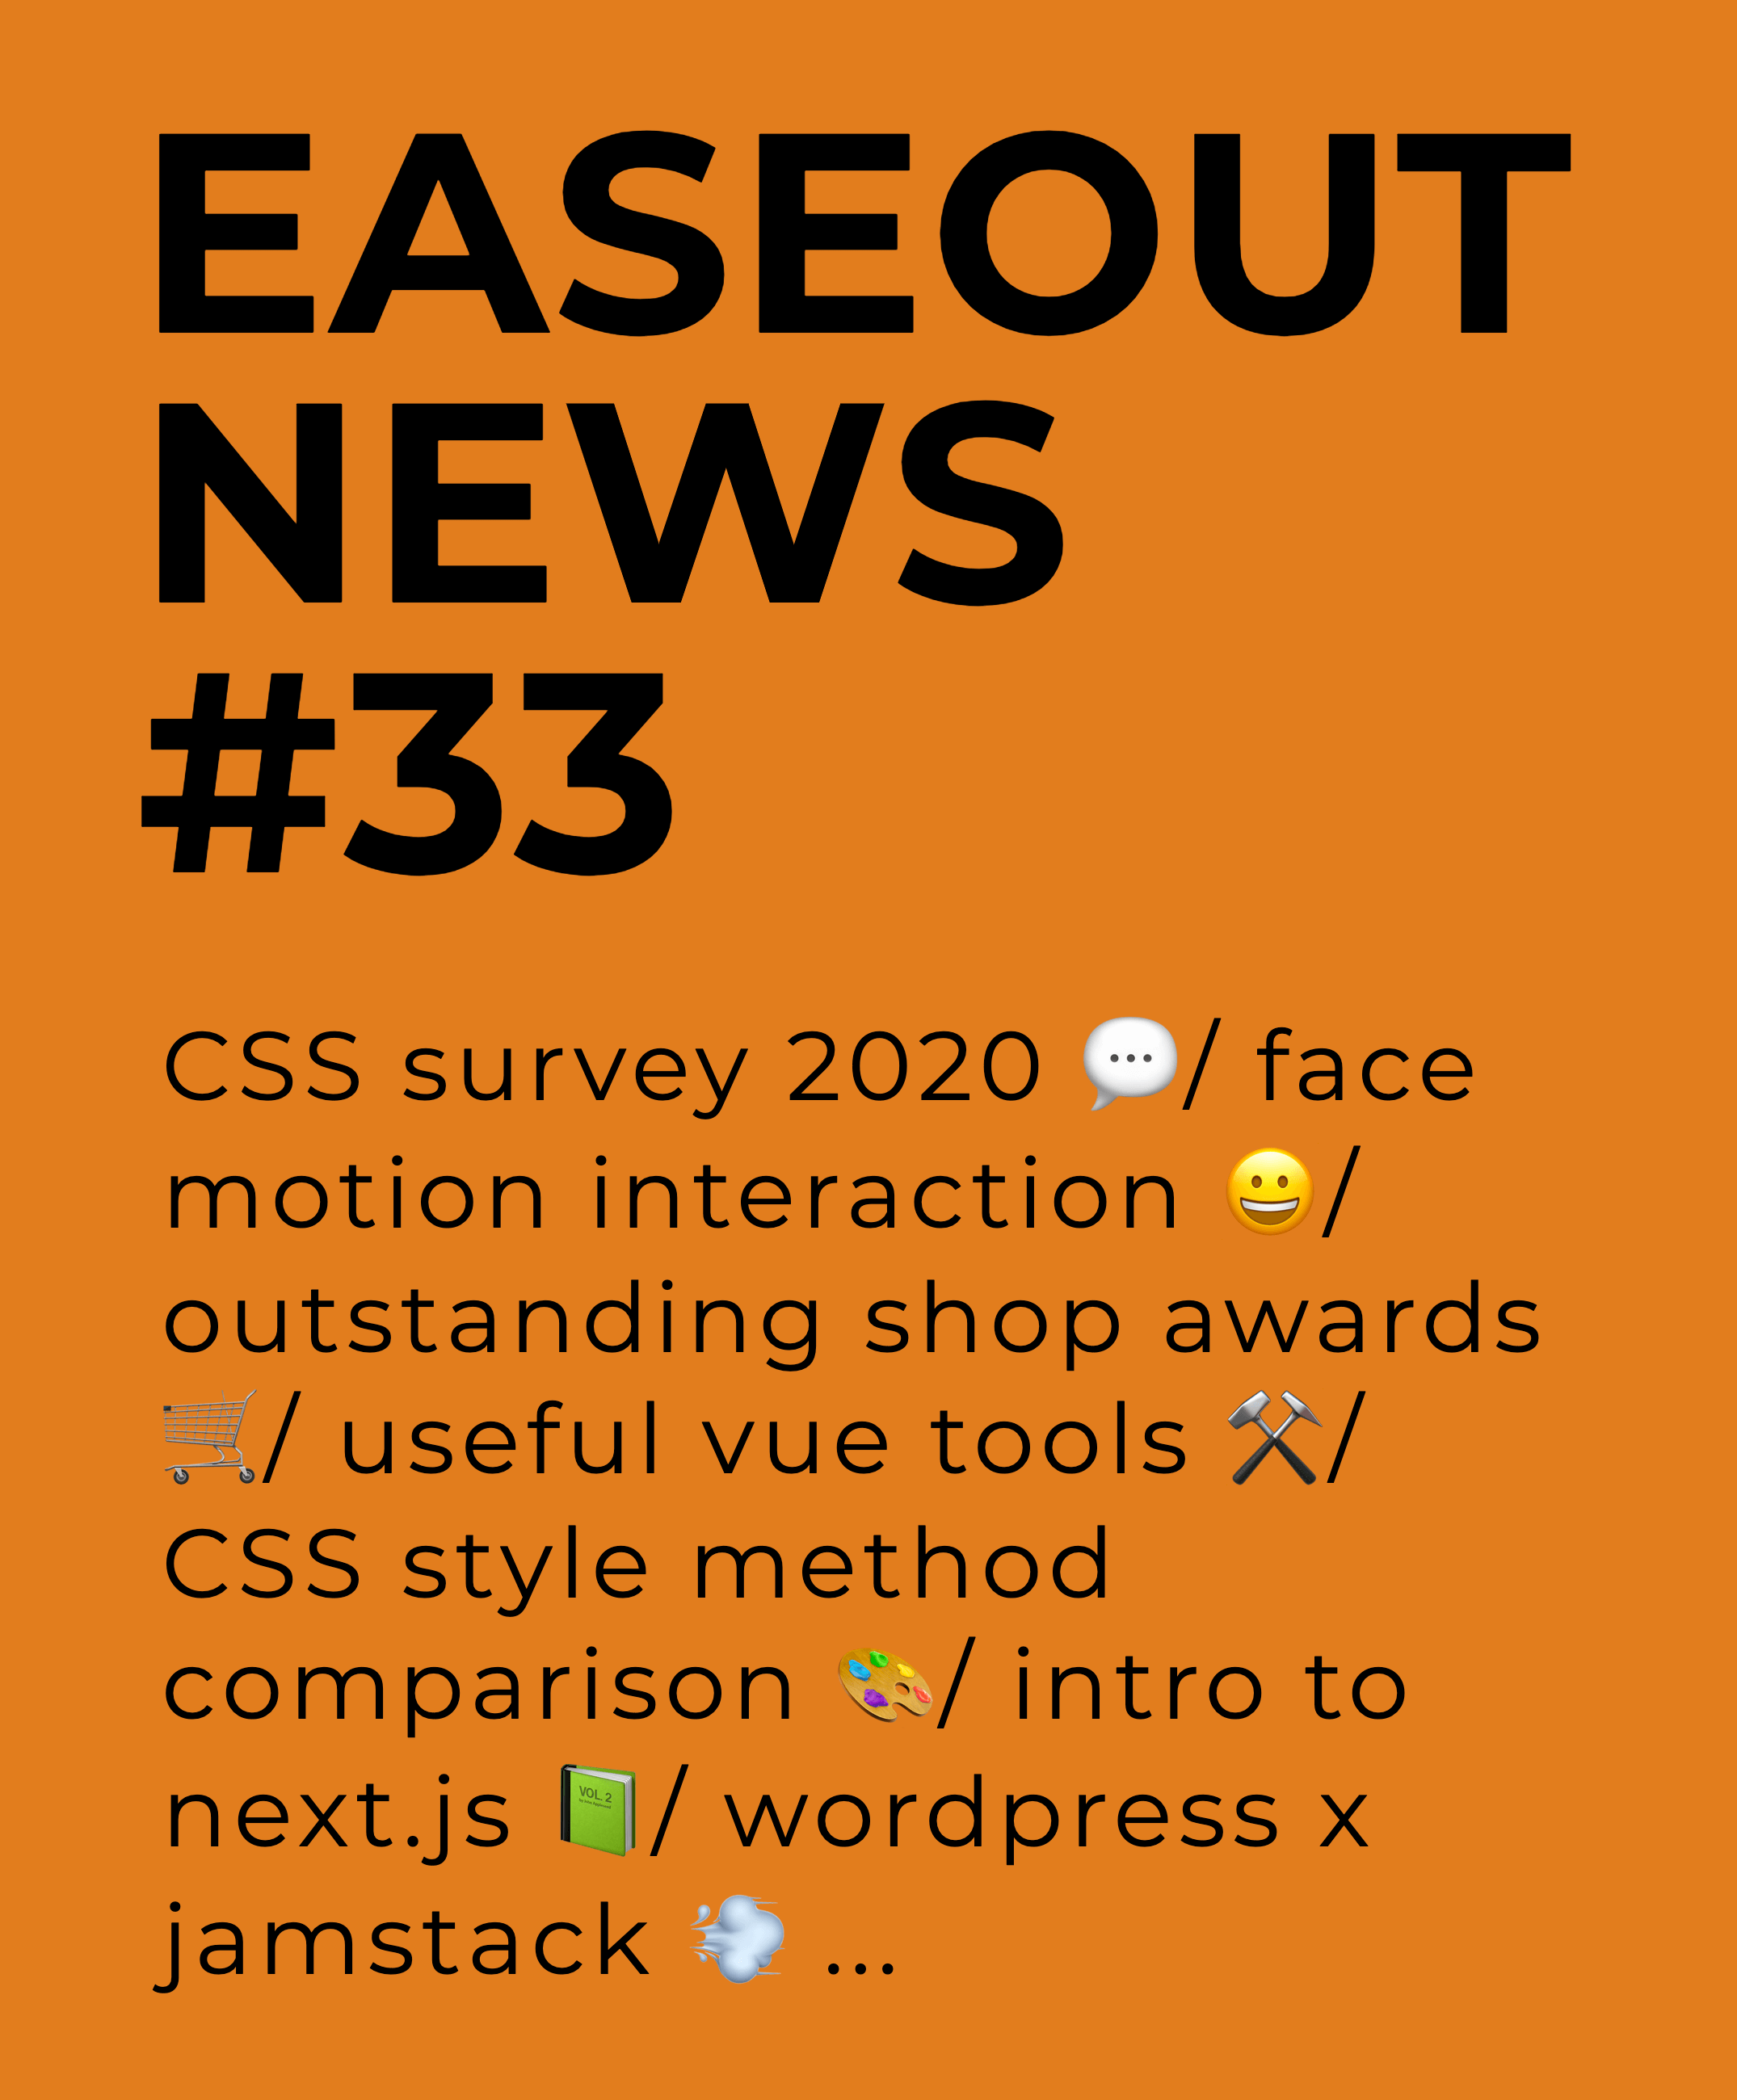 Easeout Weekly #33